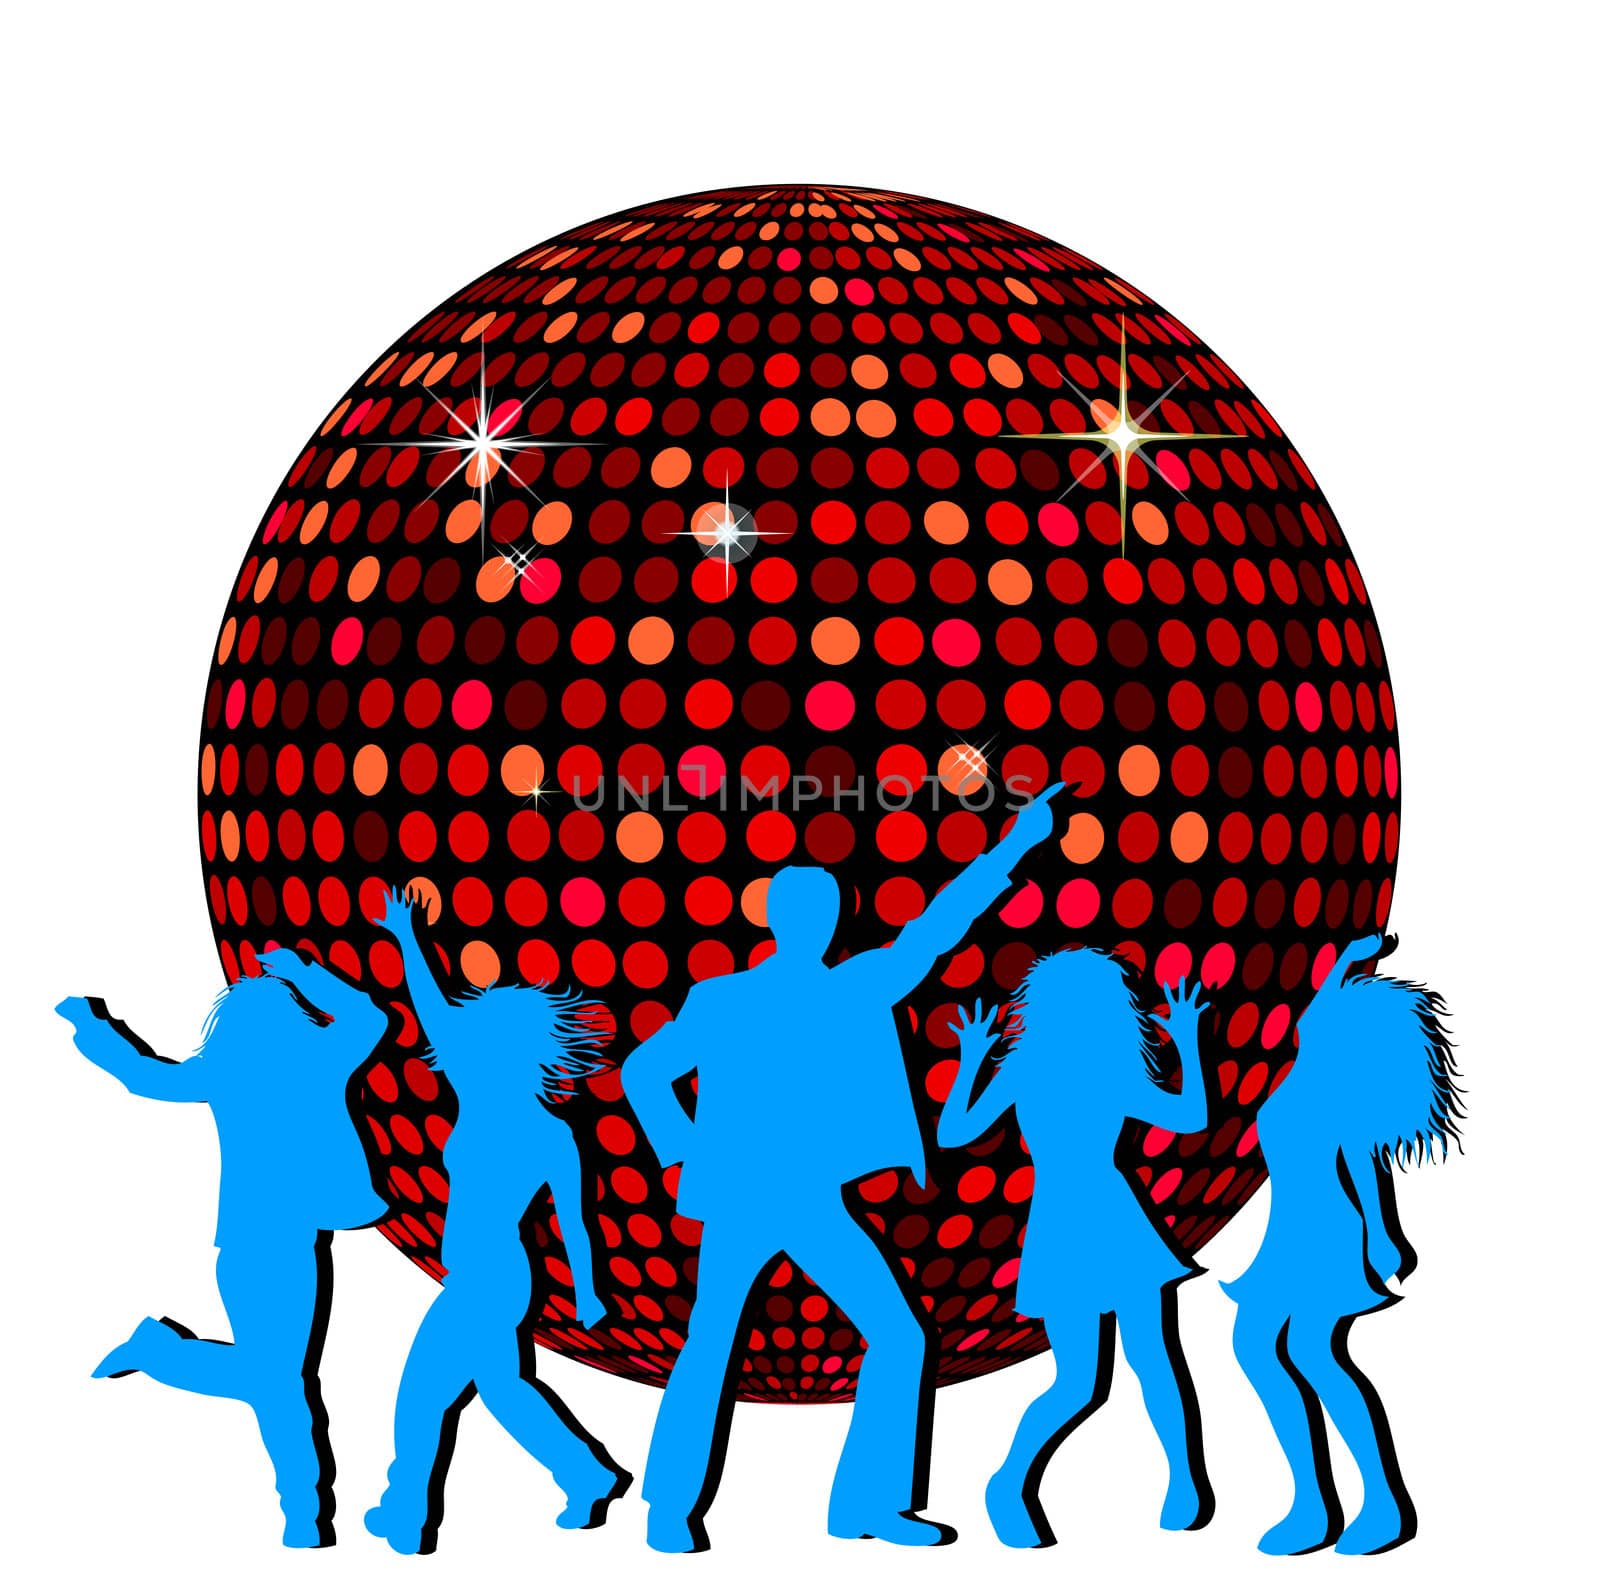 Disco Ball and dancing People